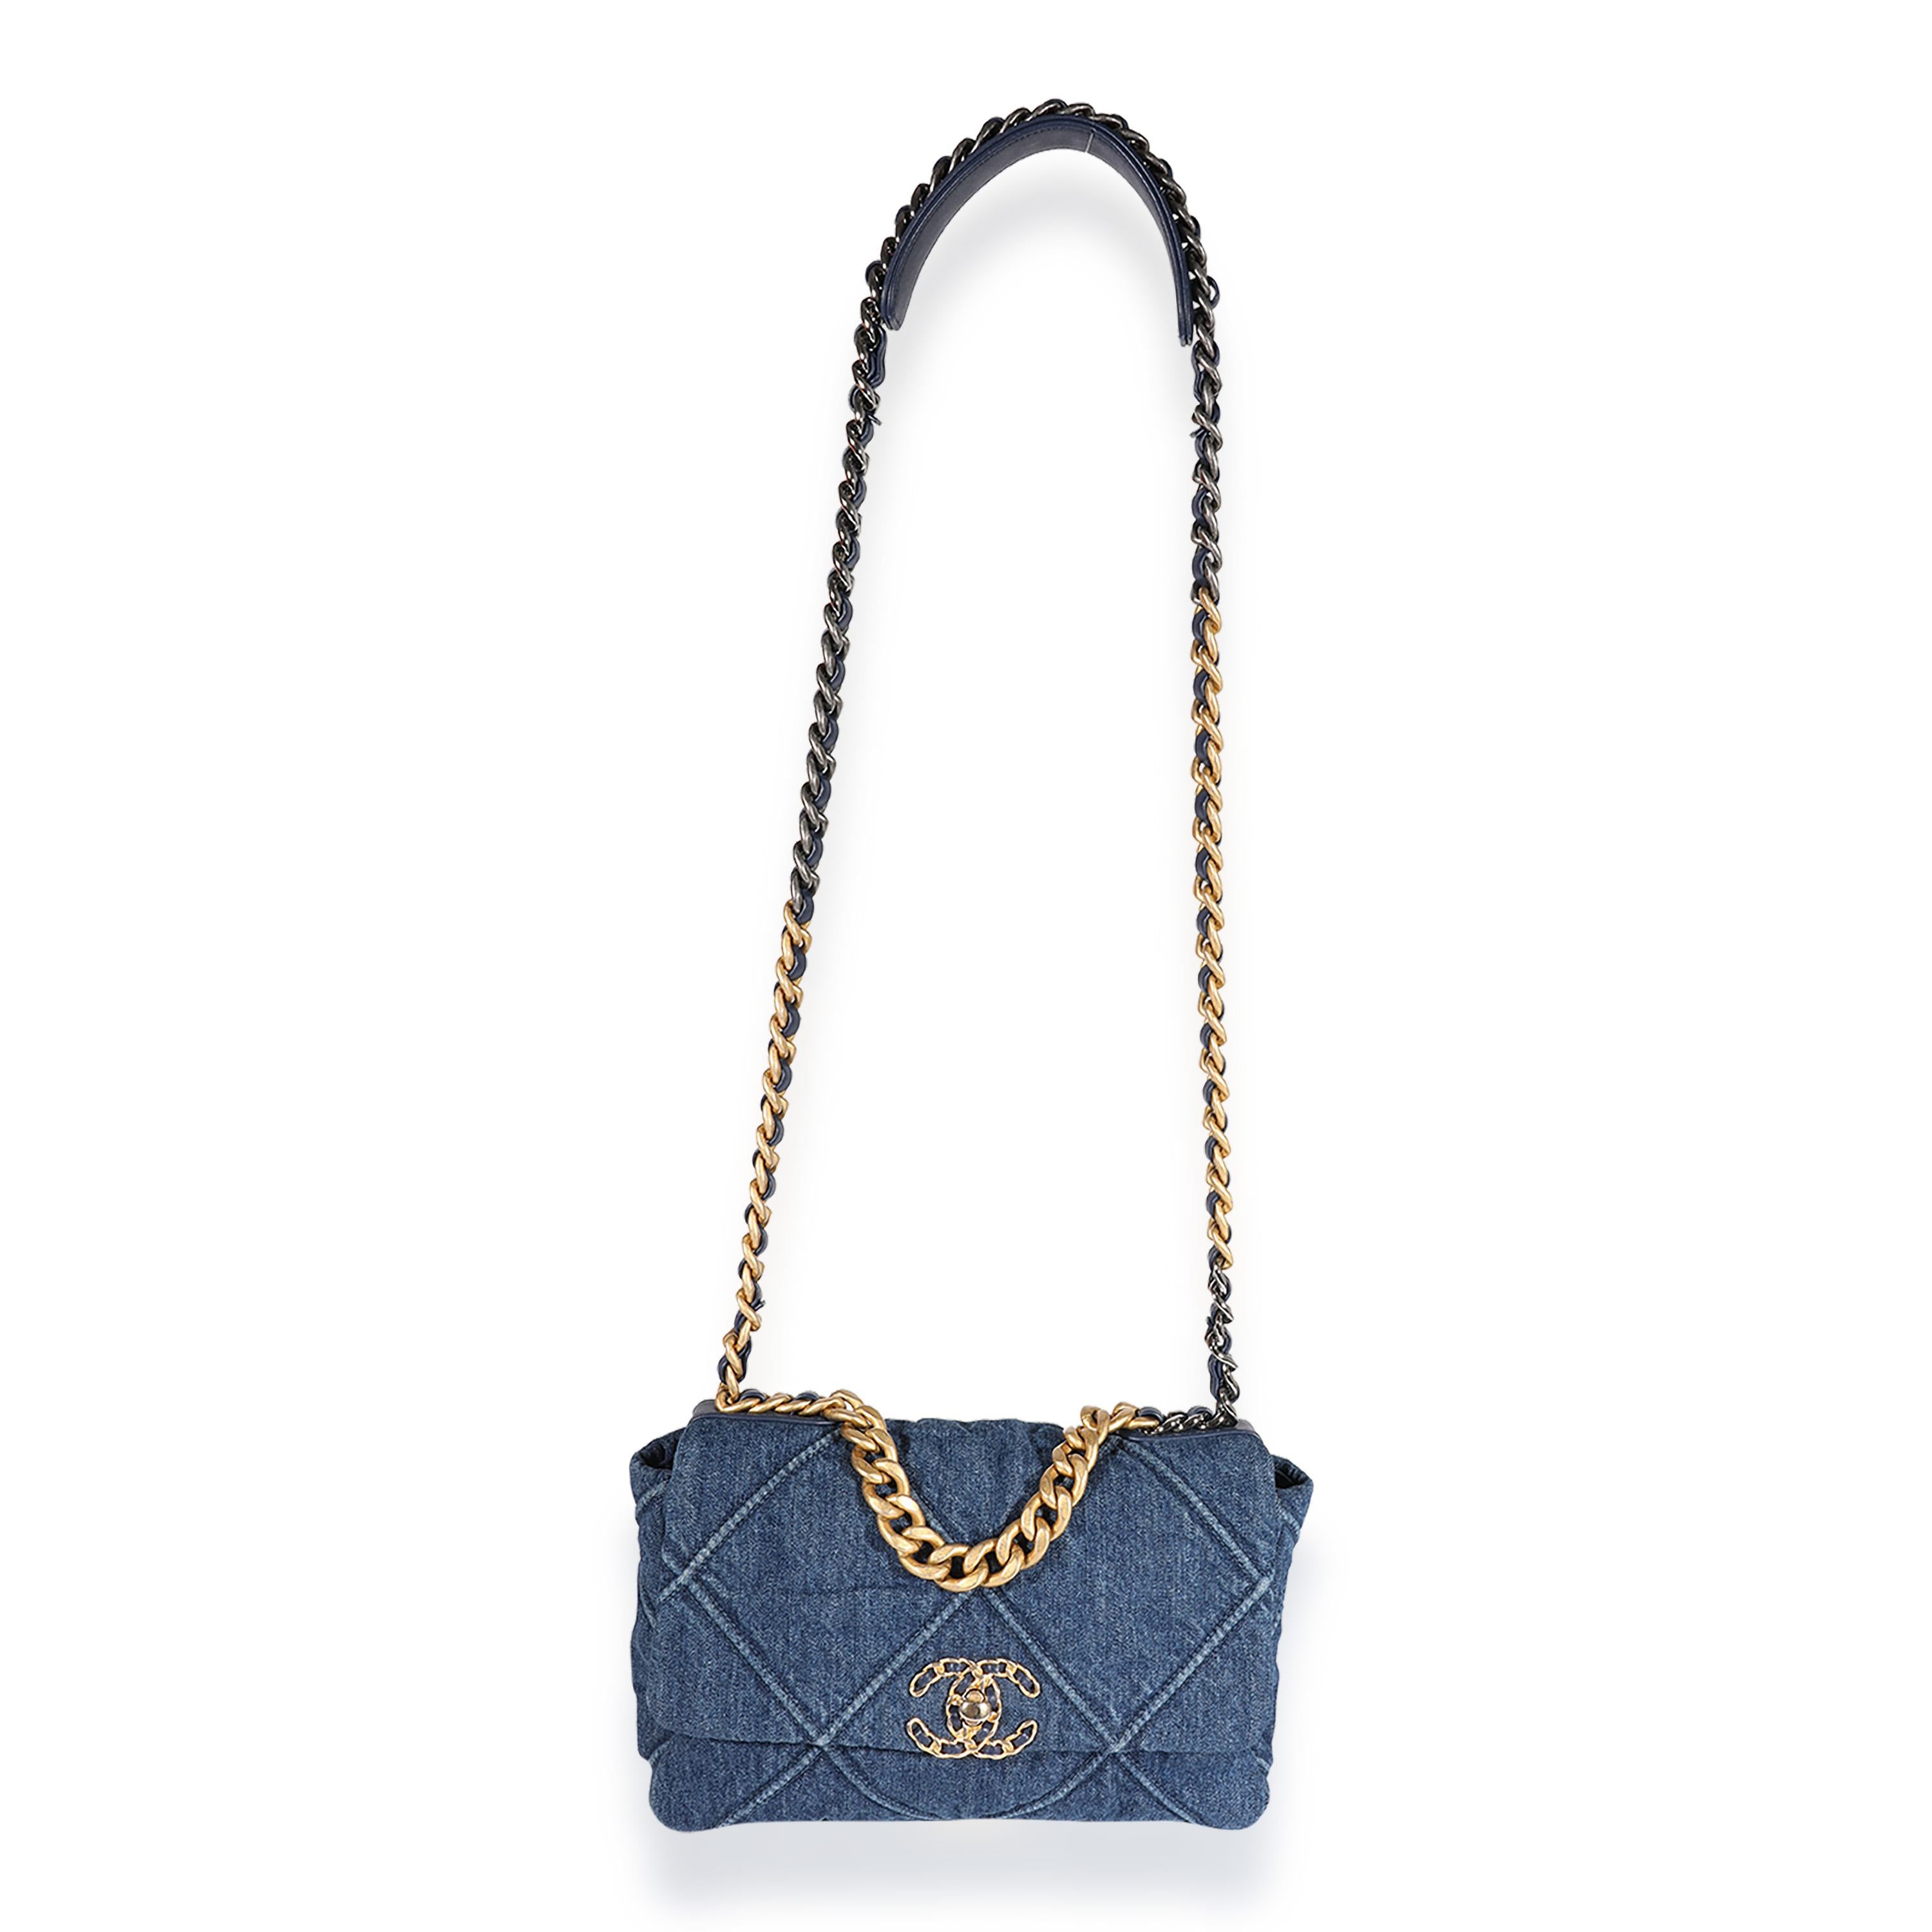 Listing Title: Chanel Blue Denim Quilted Medium Chanel 19 Bag
SKU: 123012
Condition: Pre-owned 
Handbag Condition: Excellent
Condition Comments: Excellent Condition. Light scratching at hardware. No other signs of wear.
Brand: Chanel
Model: Denim